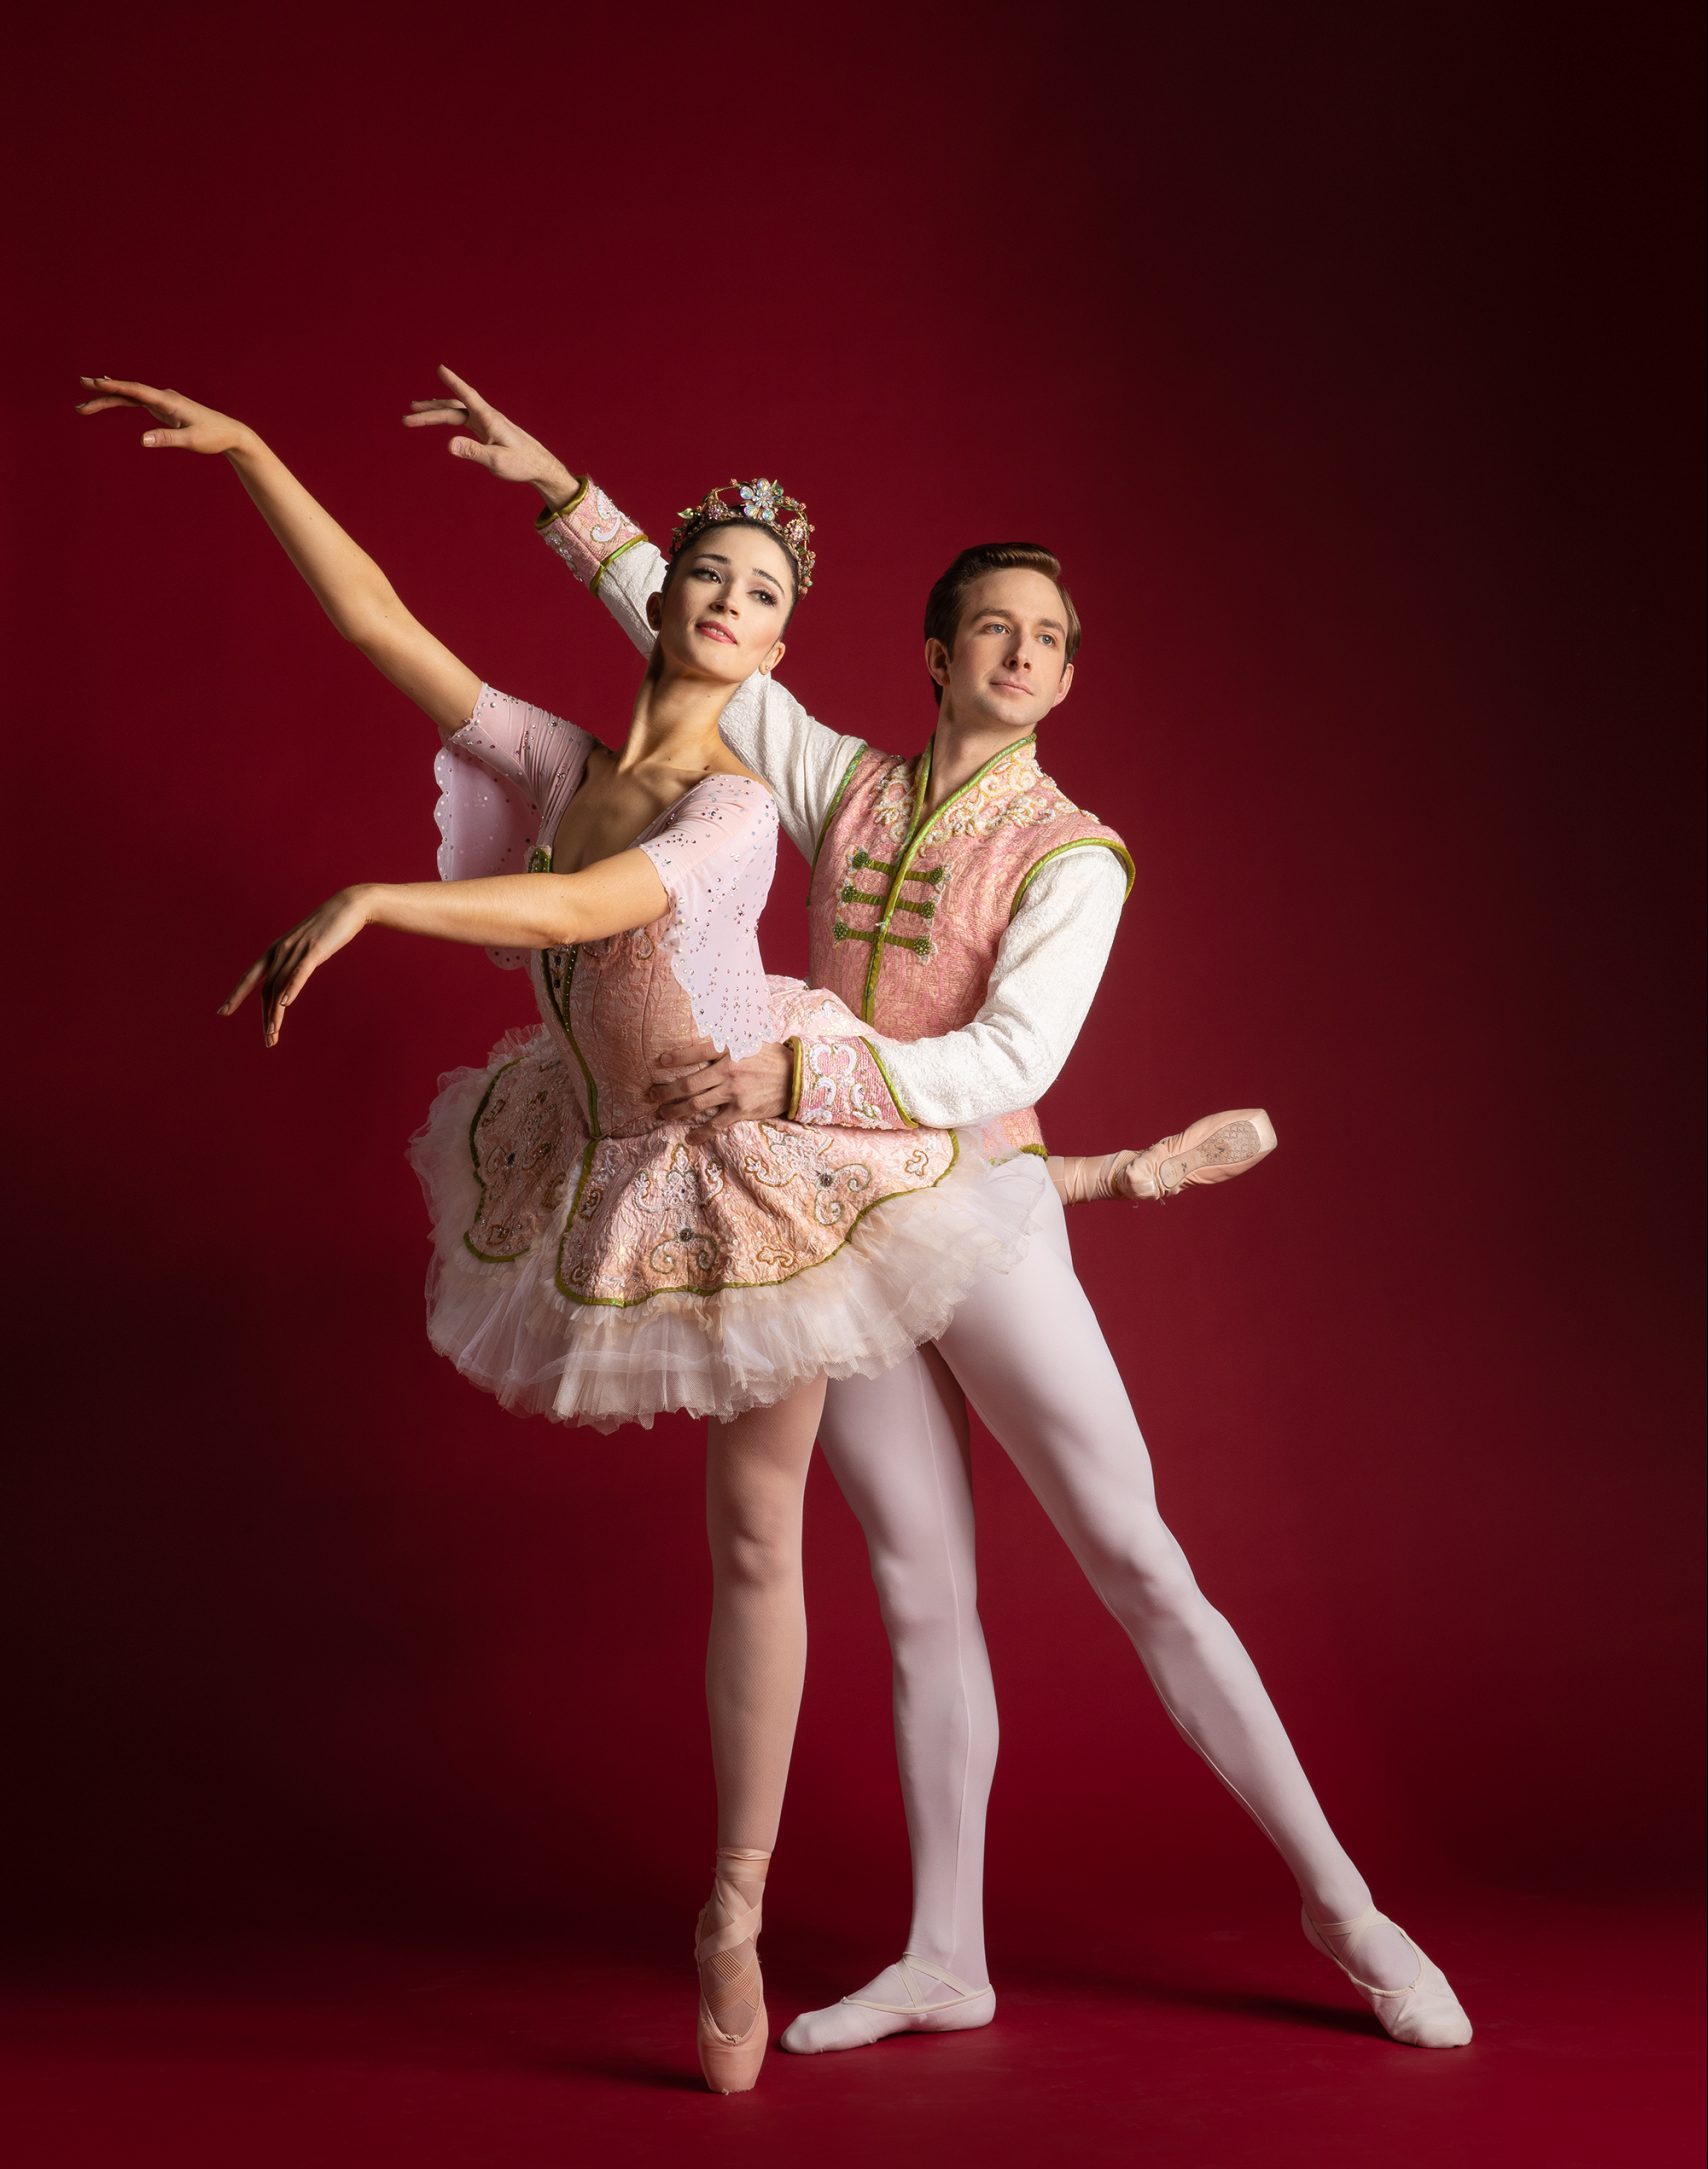 Amid the dazzling spectacle of Pittsburgh Ballet Theatre's 'The Nutcracker,' there's also good old good ballet. Shown here are dancers Marisa Grywalski and Lucius Kirst. Photo: Duane Rieder